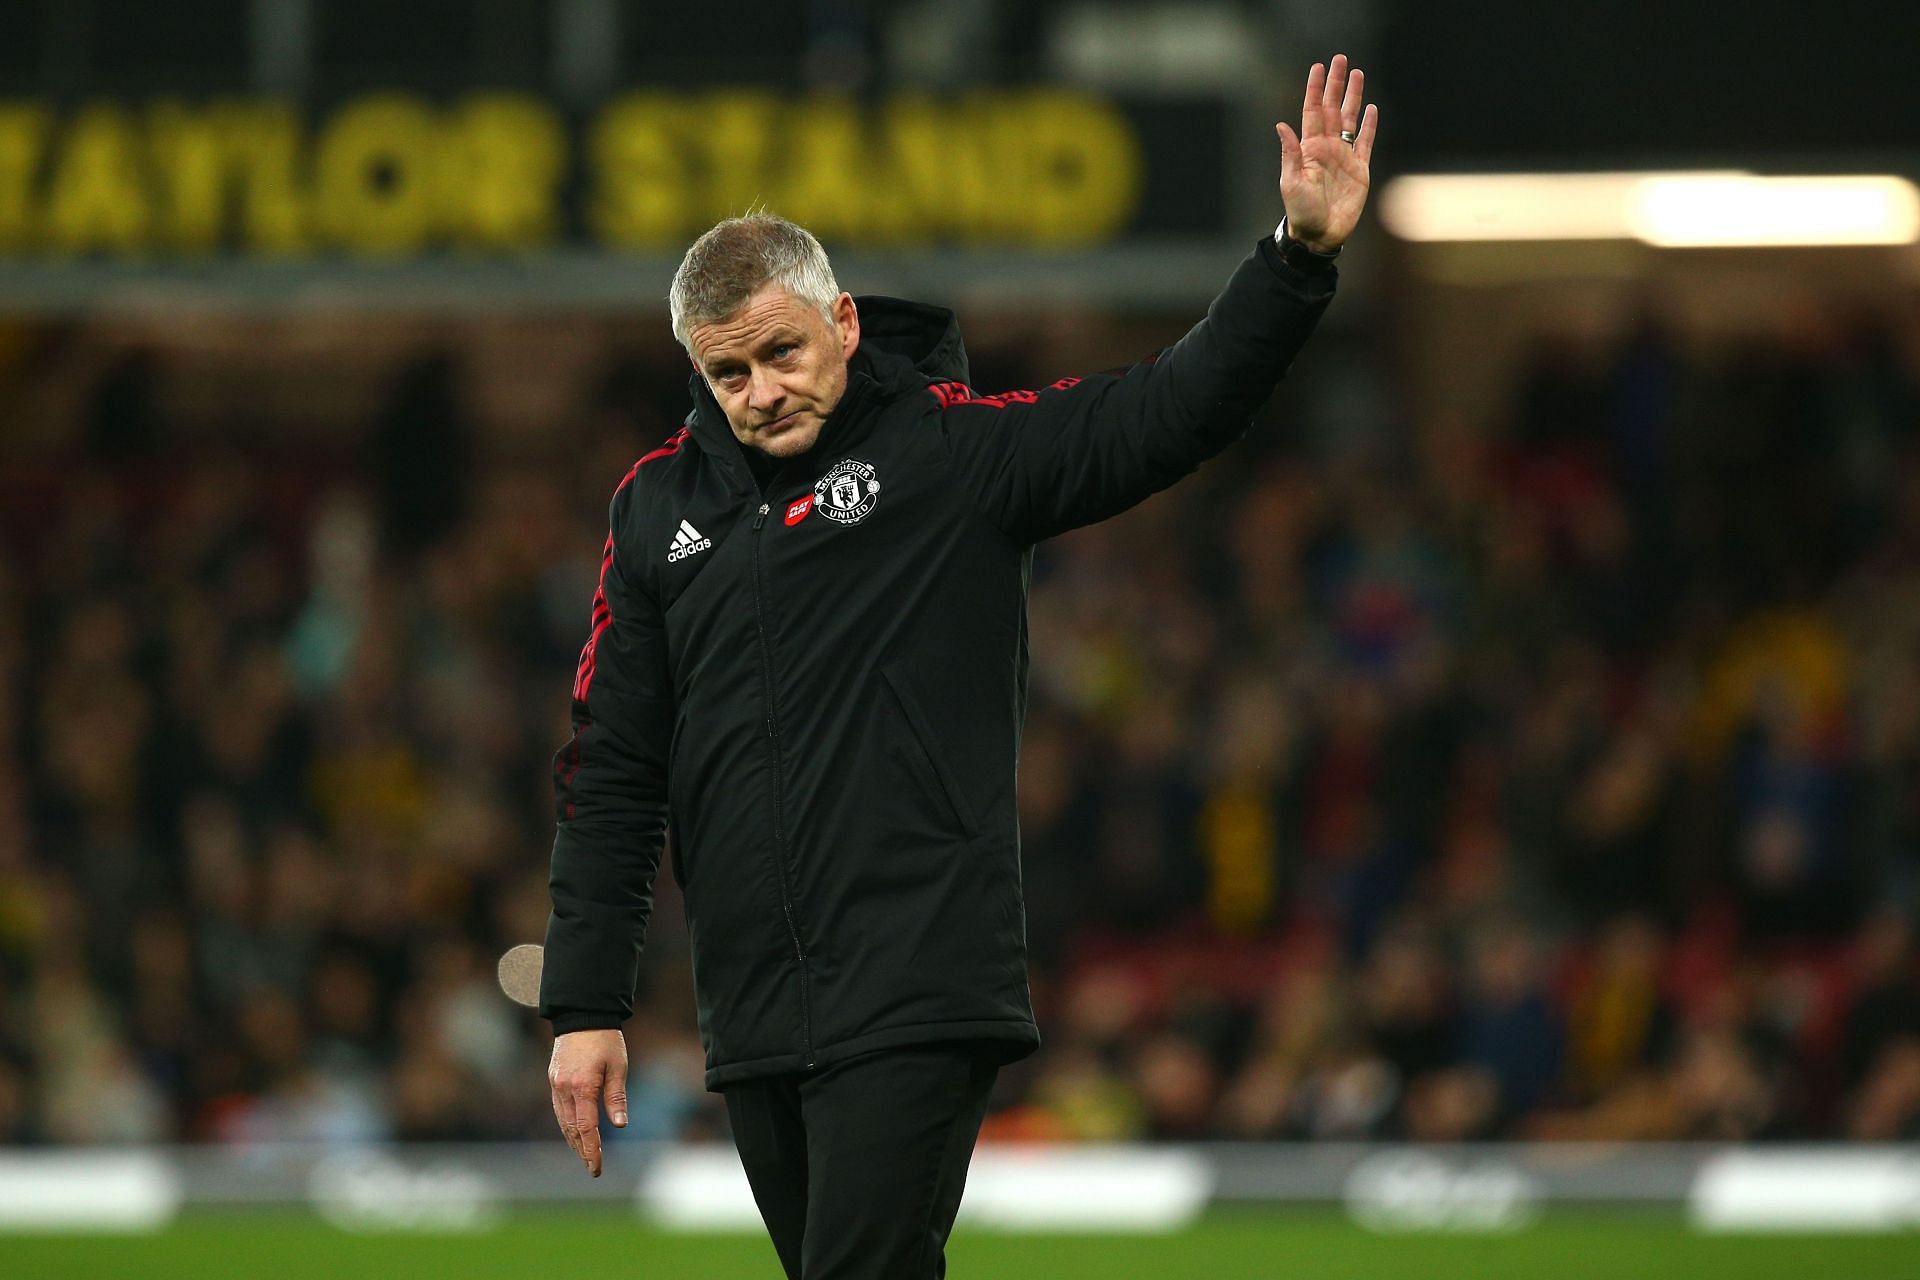 Manchester United are looking for Ole Gunnar Solskjaer replacement